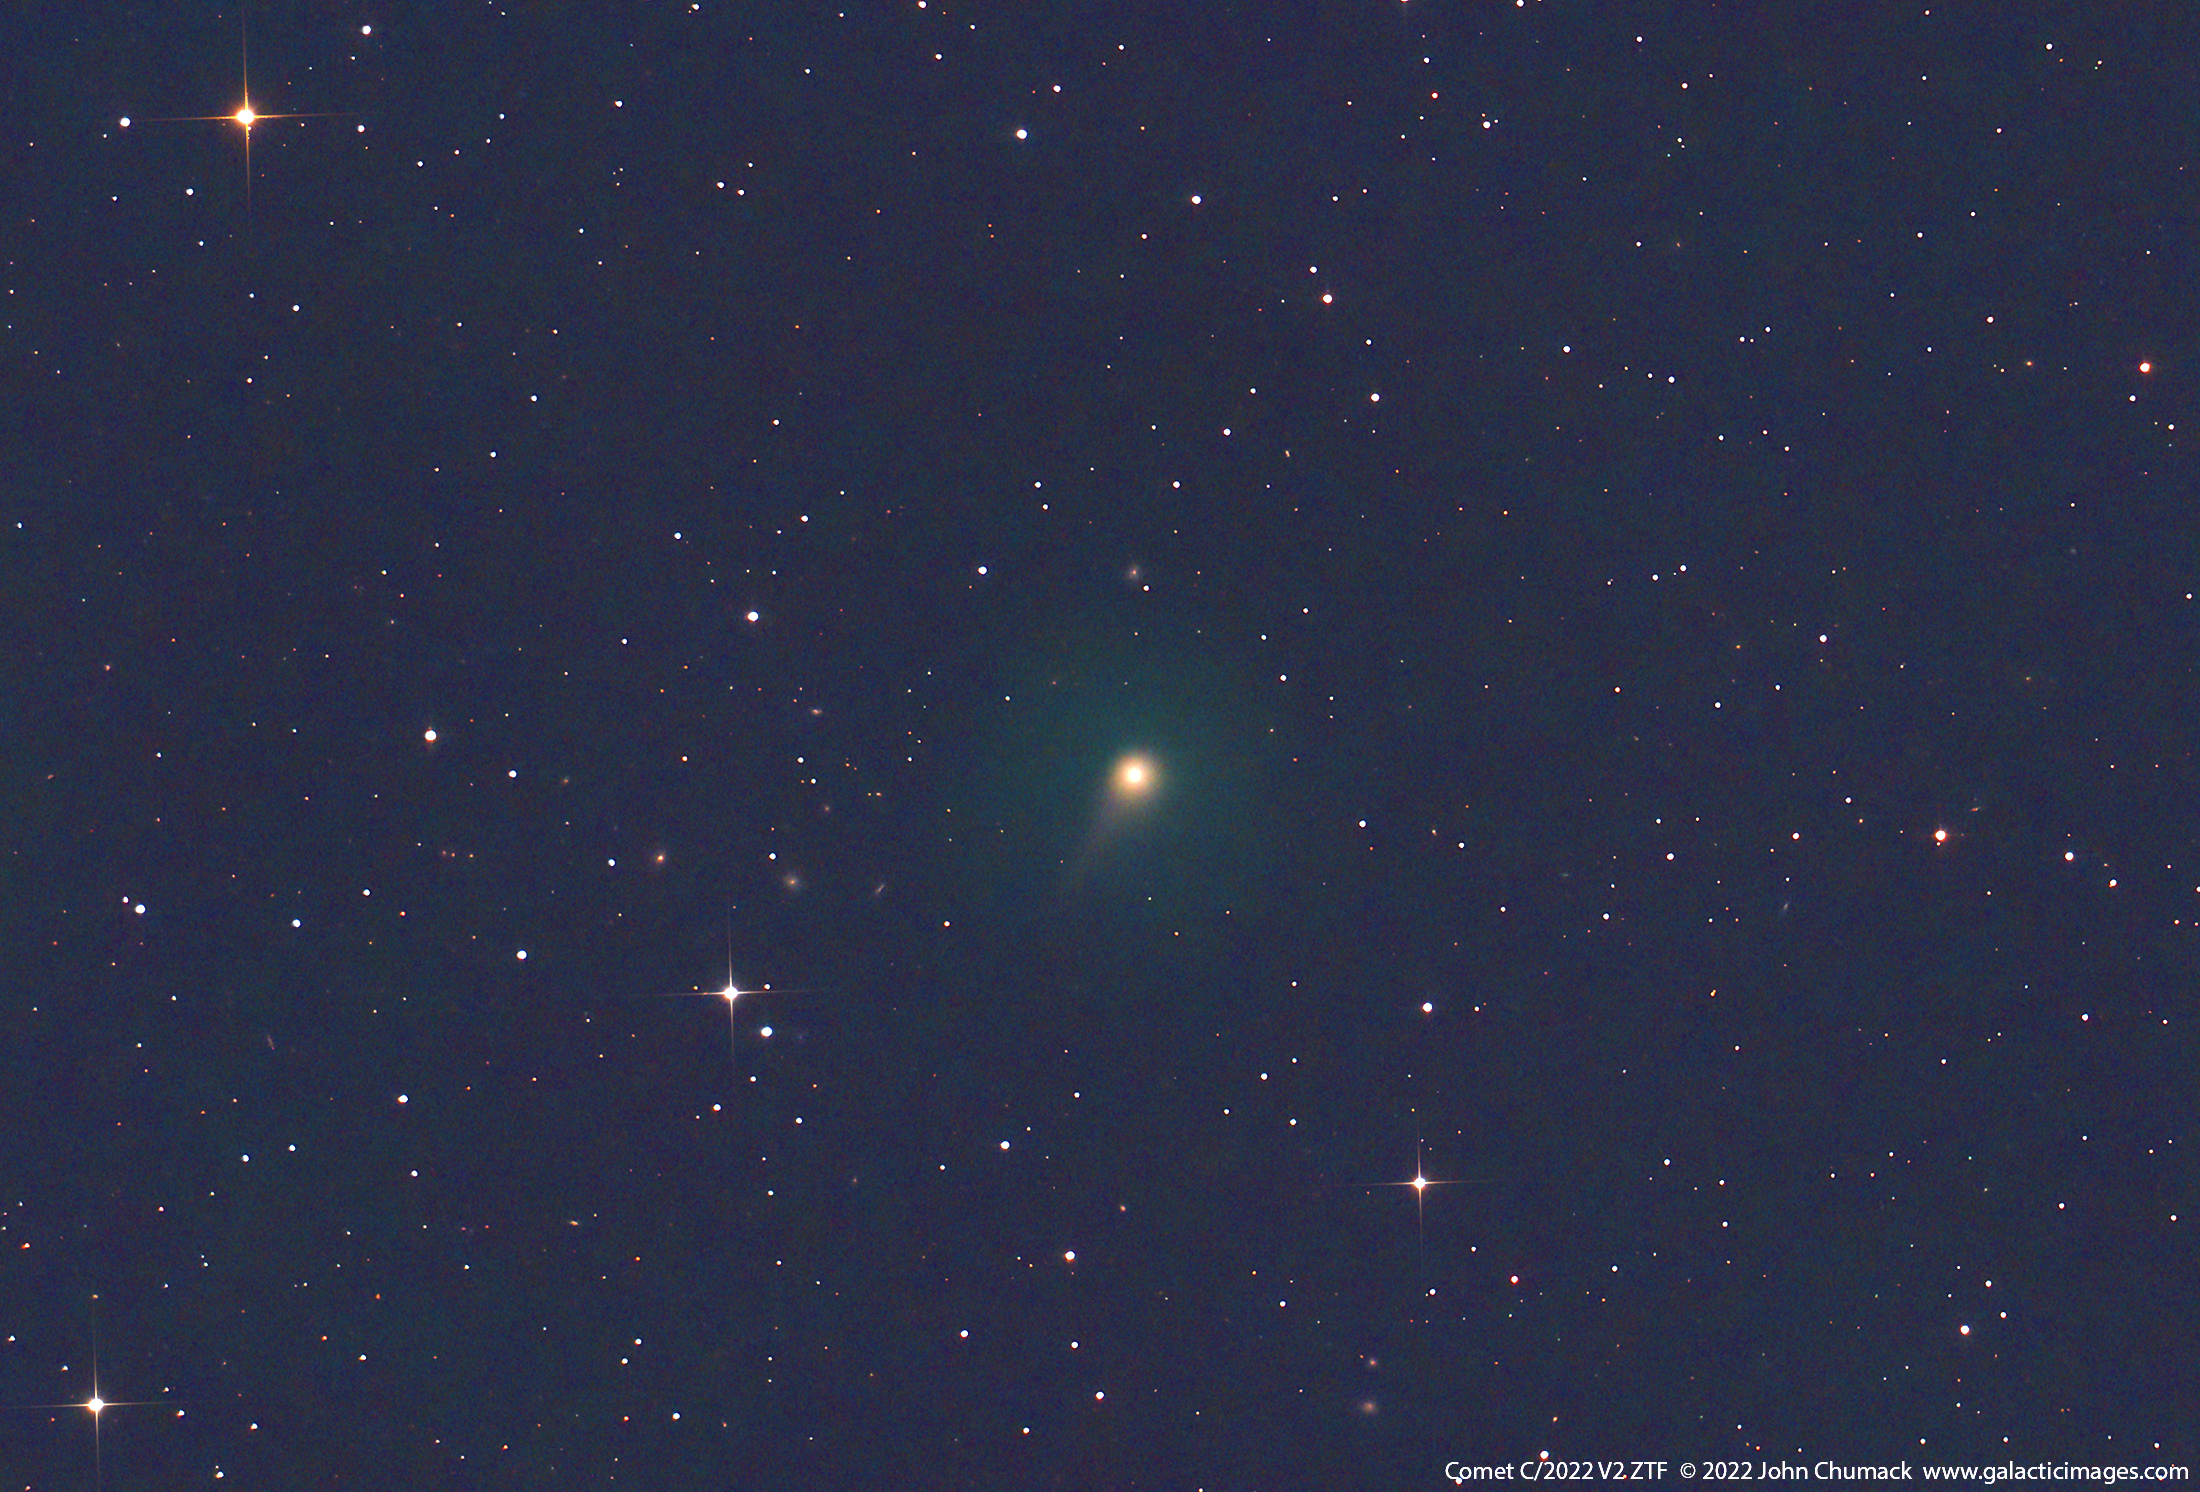 Comet C/2022 E3 ZTF imaged on November 26, 2022 from Yellow Springs, Ohio.